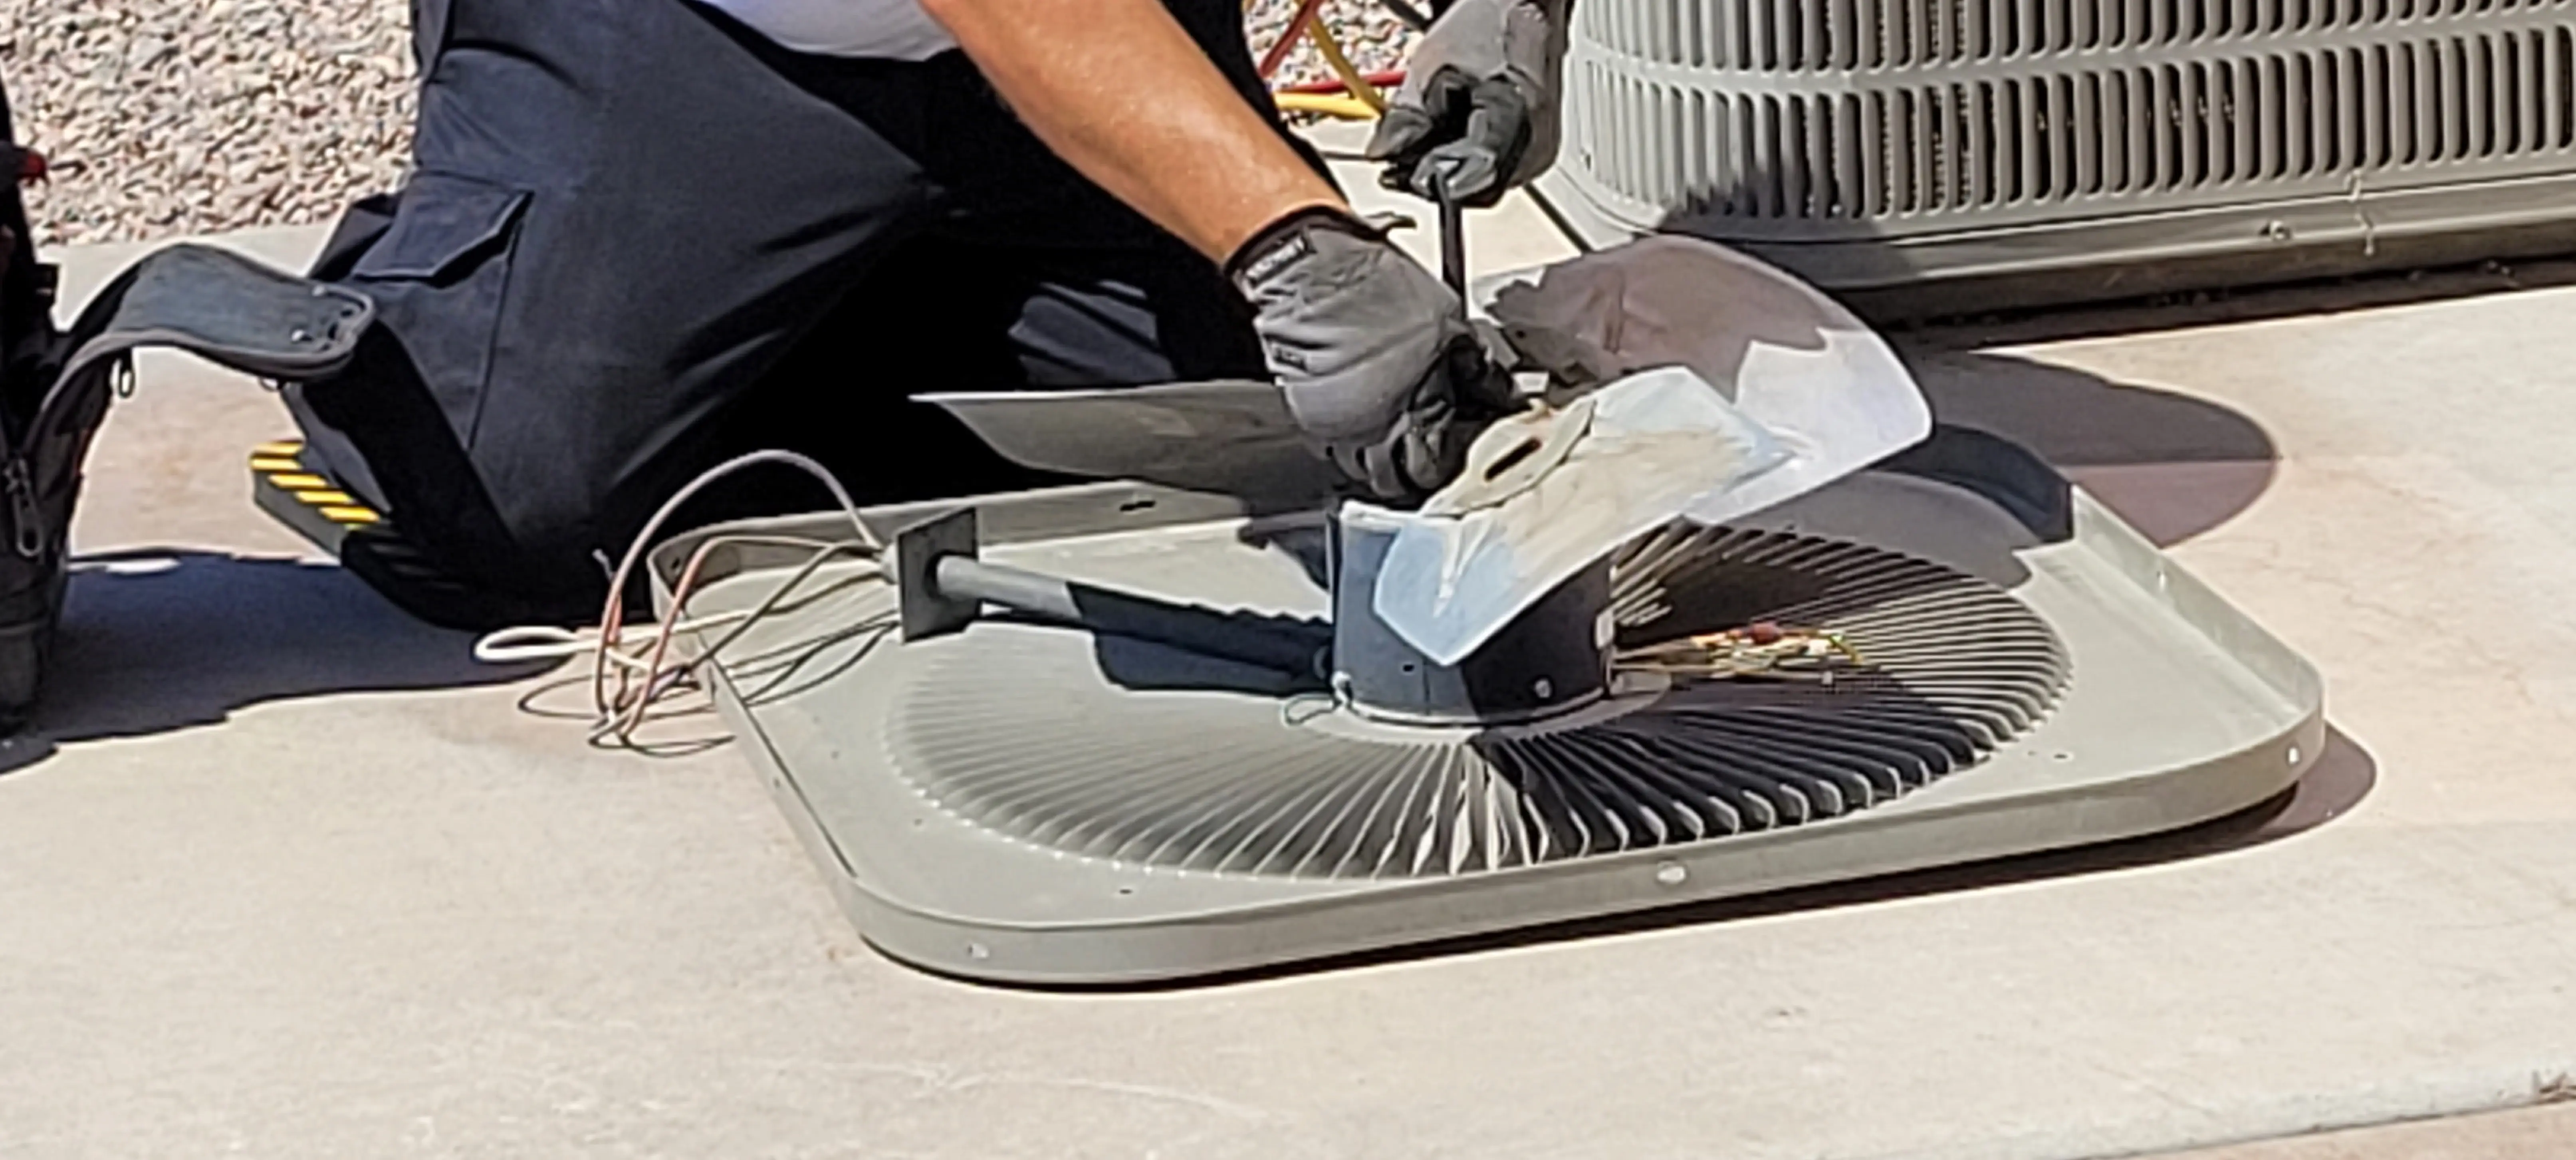 Air-Conditioning-Repair--in-Memphis-Tennessee-Air-Conditioning-Repair-5987604-image